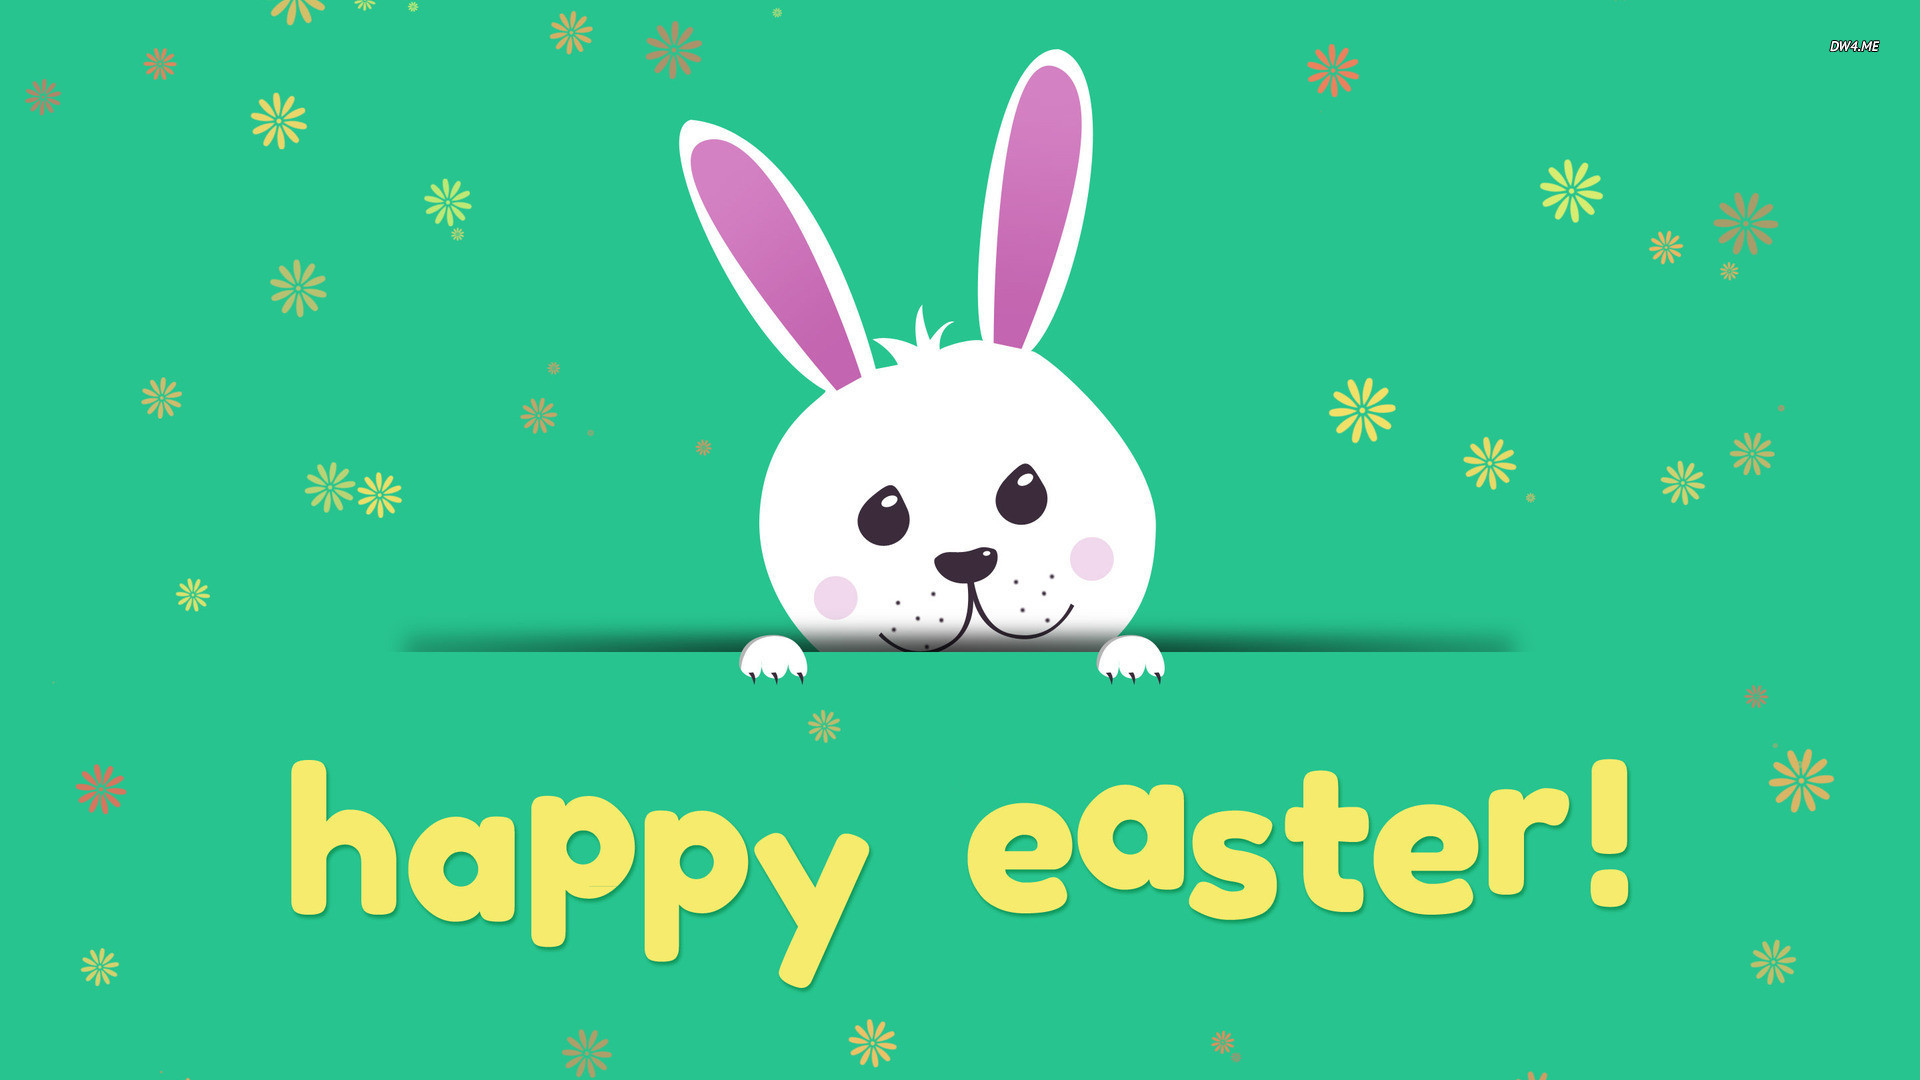 1920x1080, Happy Easter Cute Bunny Hd Free Wallpapers - Cute Easter Wallpaper Desktop - HD Wallpaper 